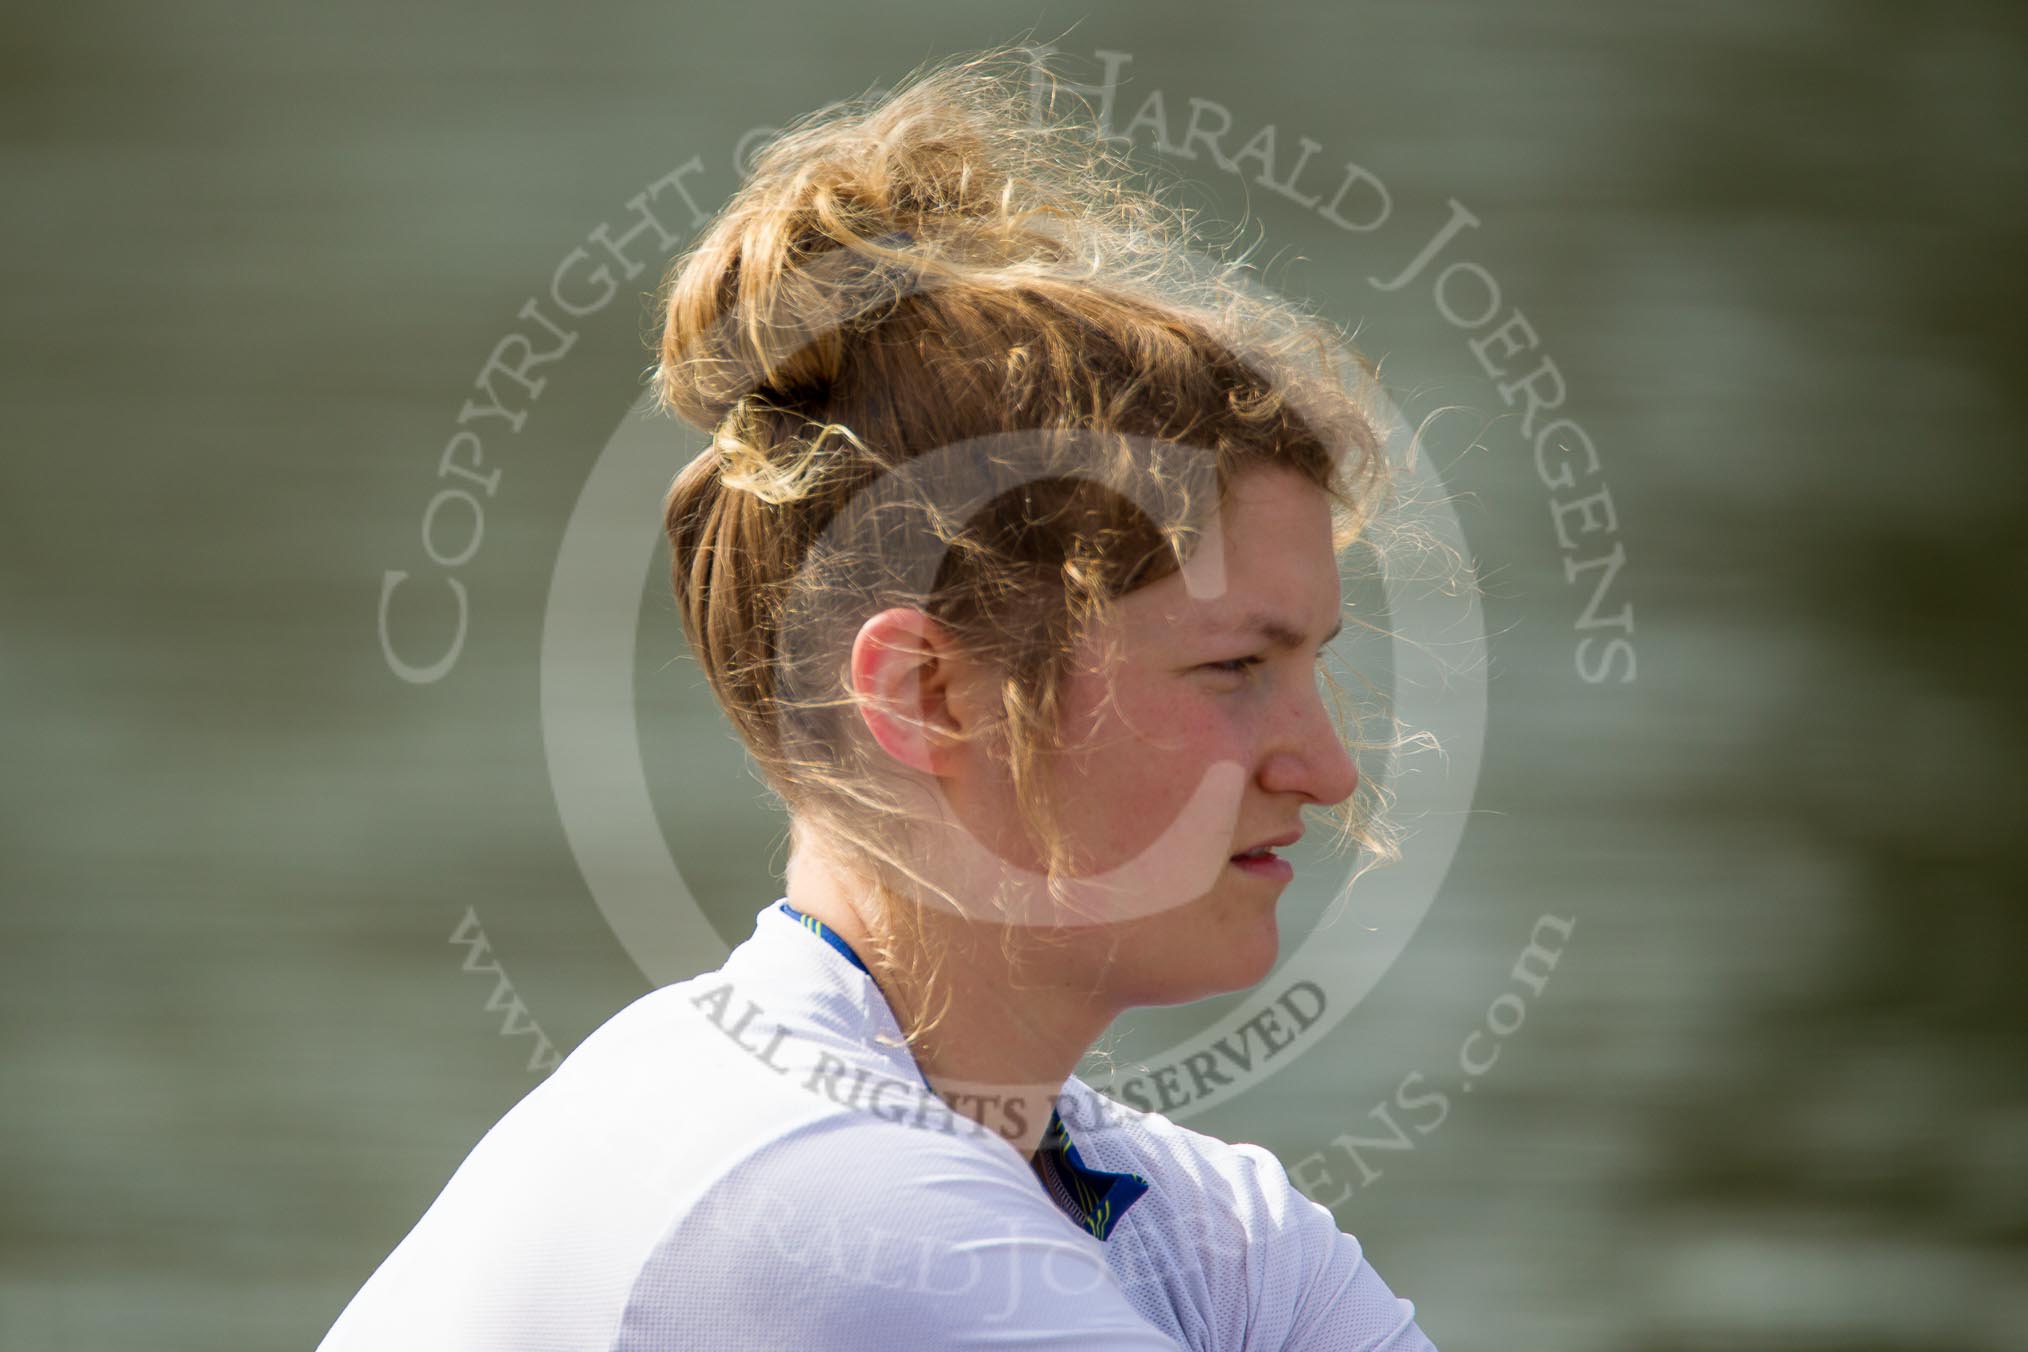 The Women's Boat Race and Henley Boat Races 2014: The Intercollegiate Women 's Race, in the Trinity College boat at bow Nina Kamčev..
River Thames,
Henley-on-Thames,
Buckinghamshire,
United Kingdom,
on 30 March 2014 at 13:39, image #52